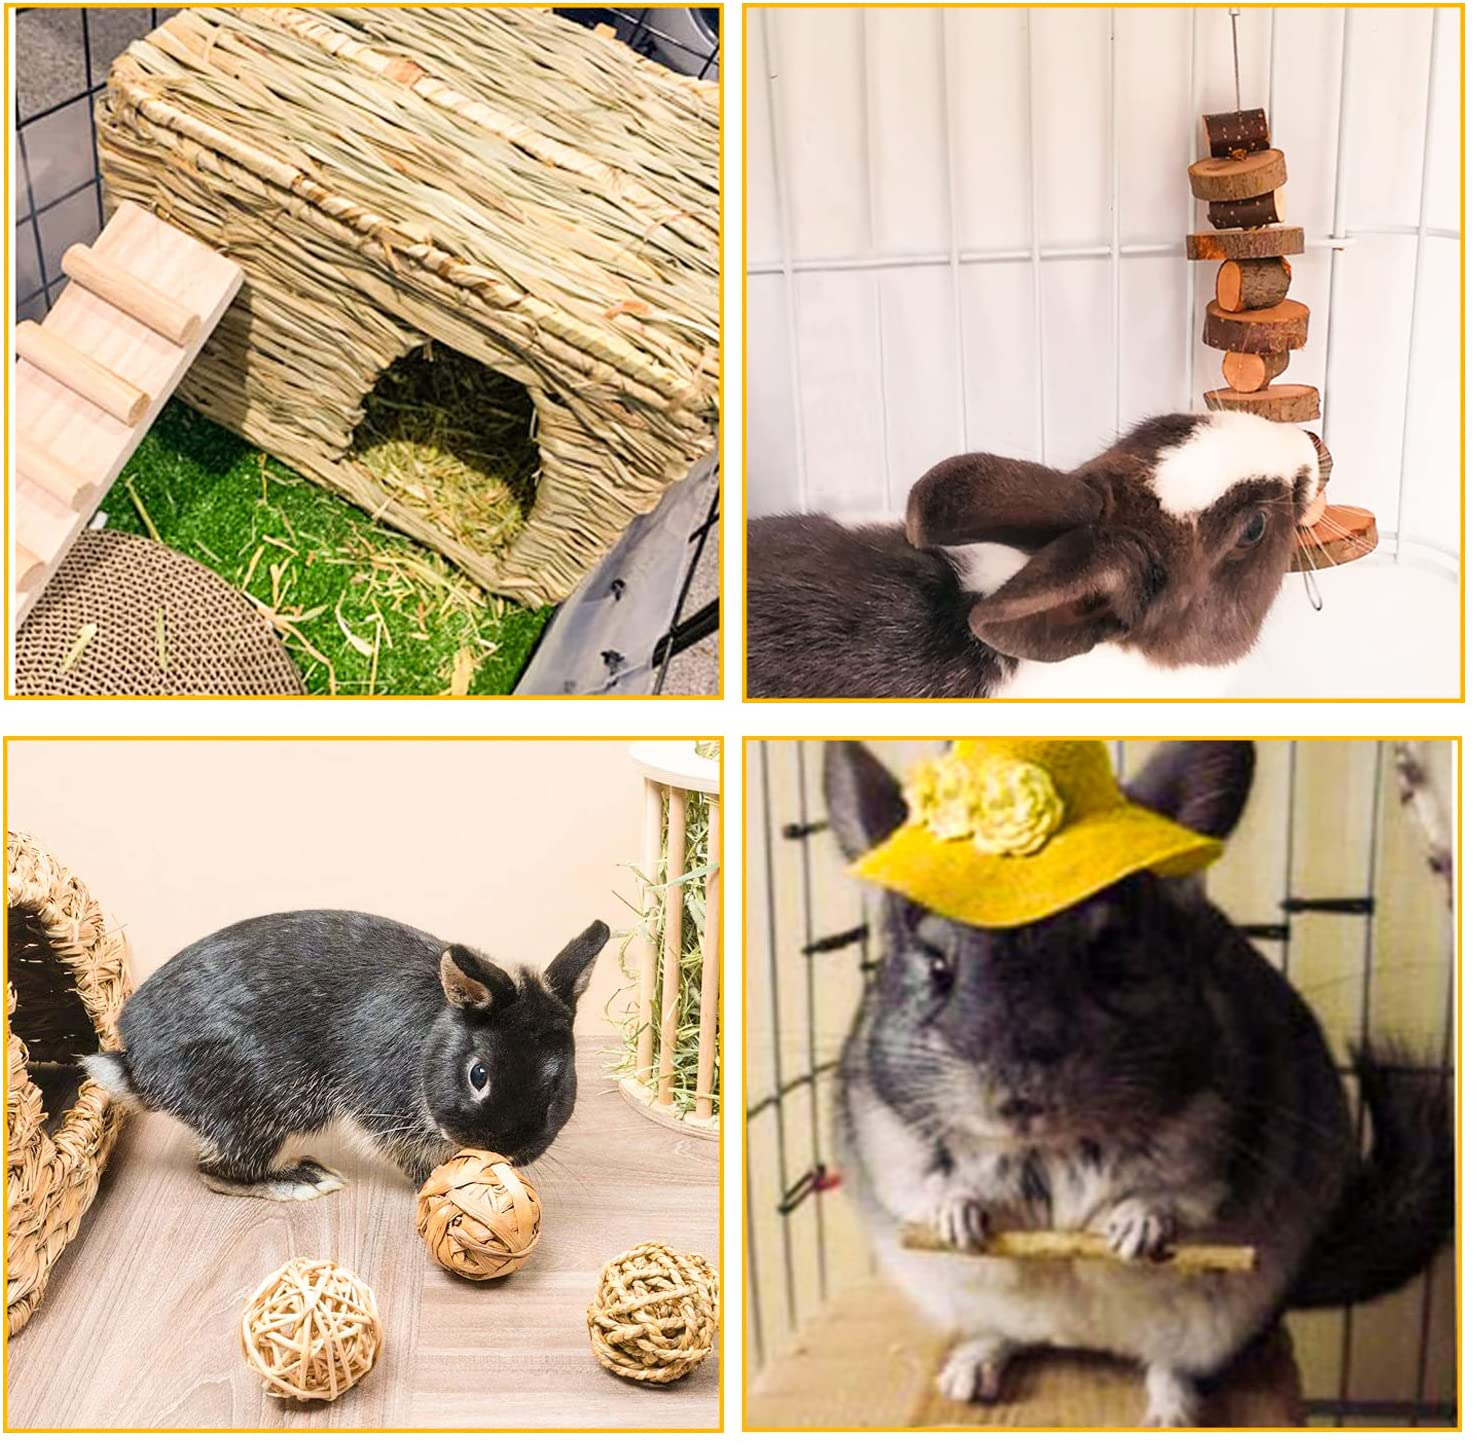 HERCOCCI Grass House for Bunny, Natural Handmade Grass Bed Hideaway Hut Mat with Chew Toys Accessories for Rabbit Bunny Guinea Pig Chinchilla Small Animal - Play and Rest